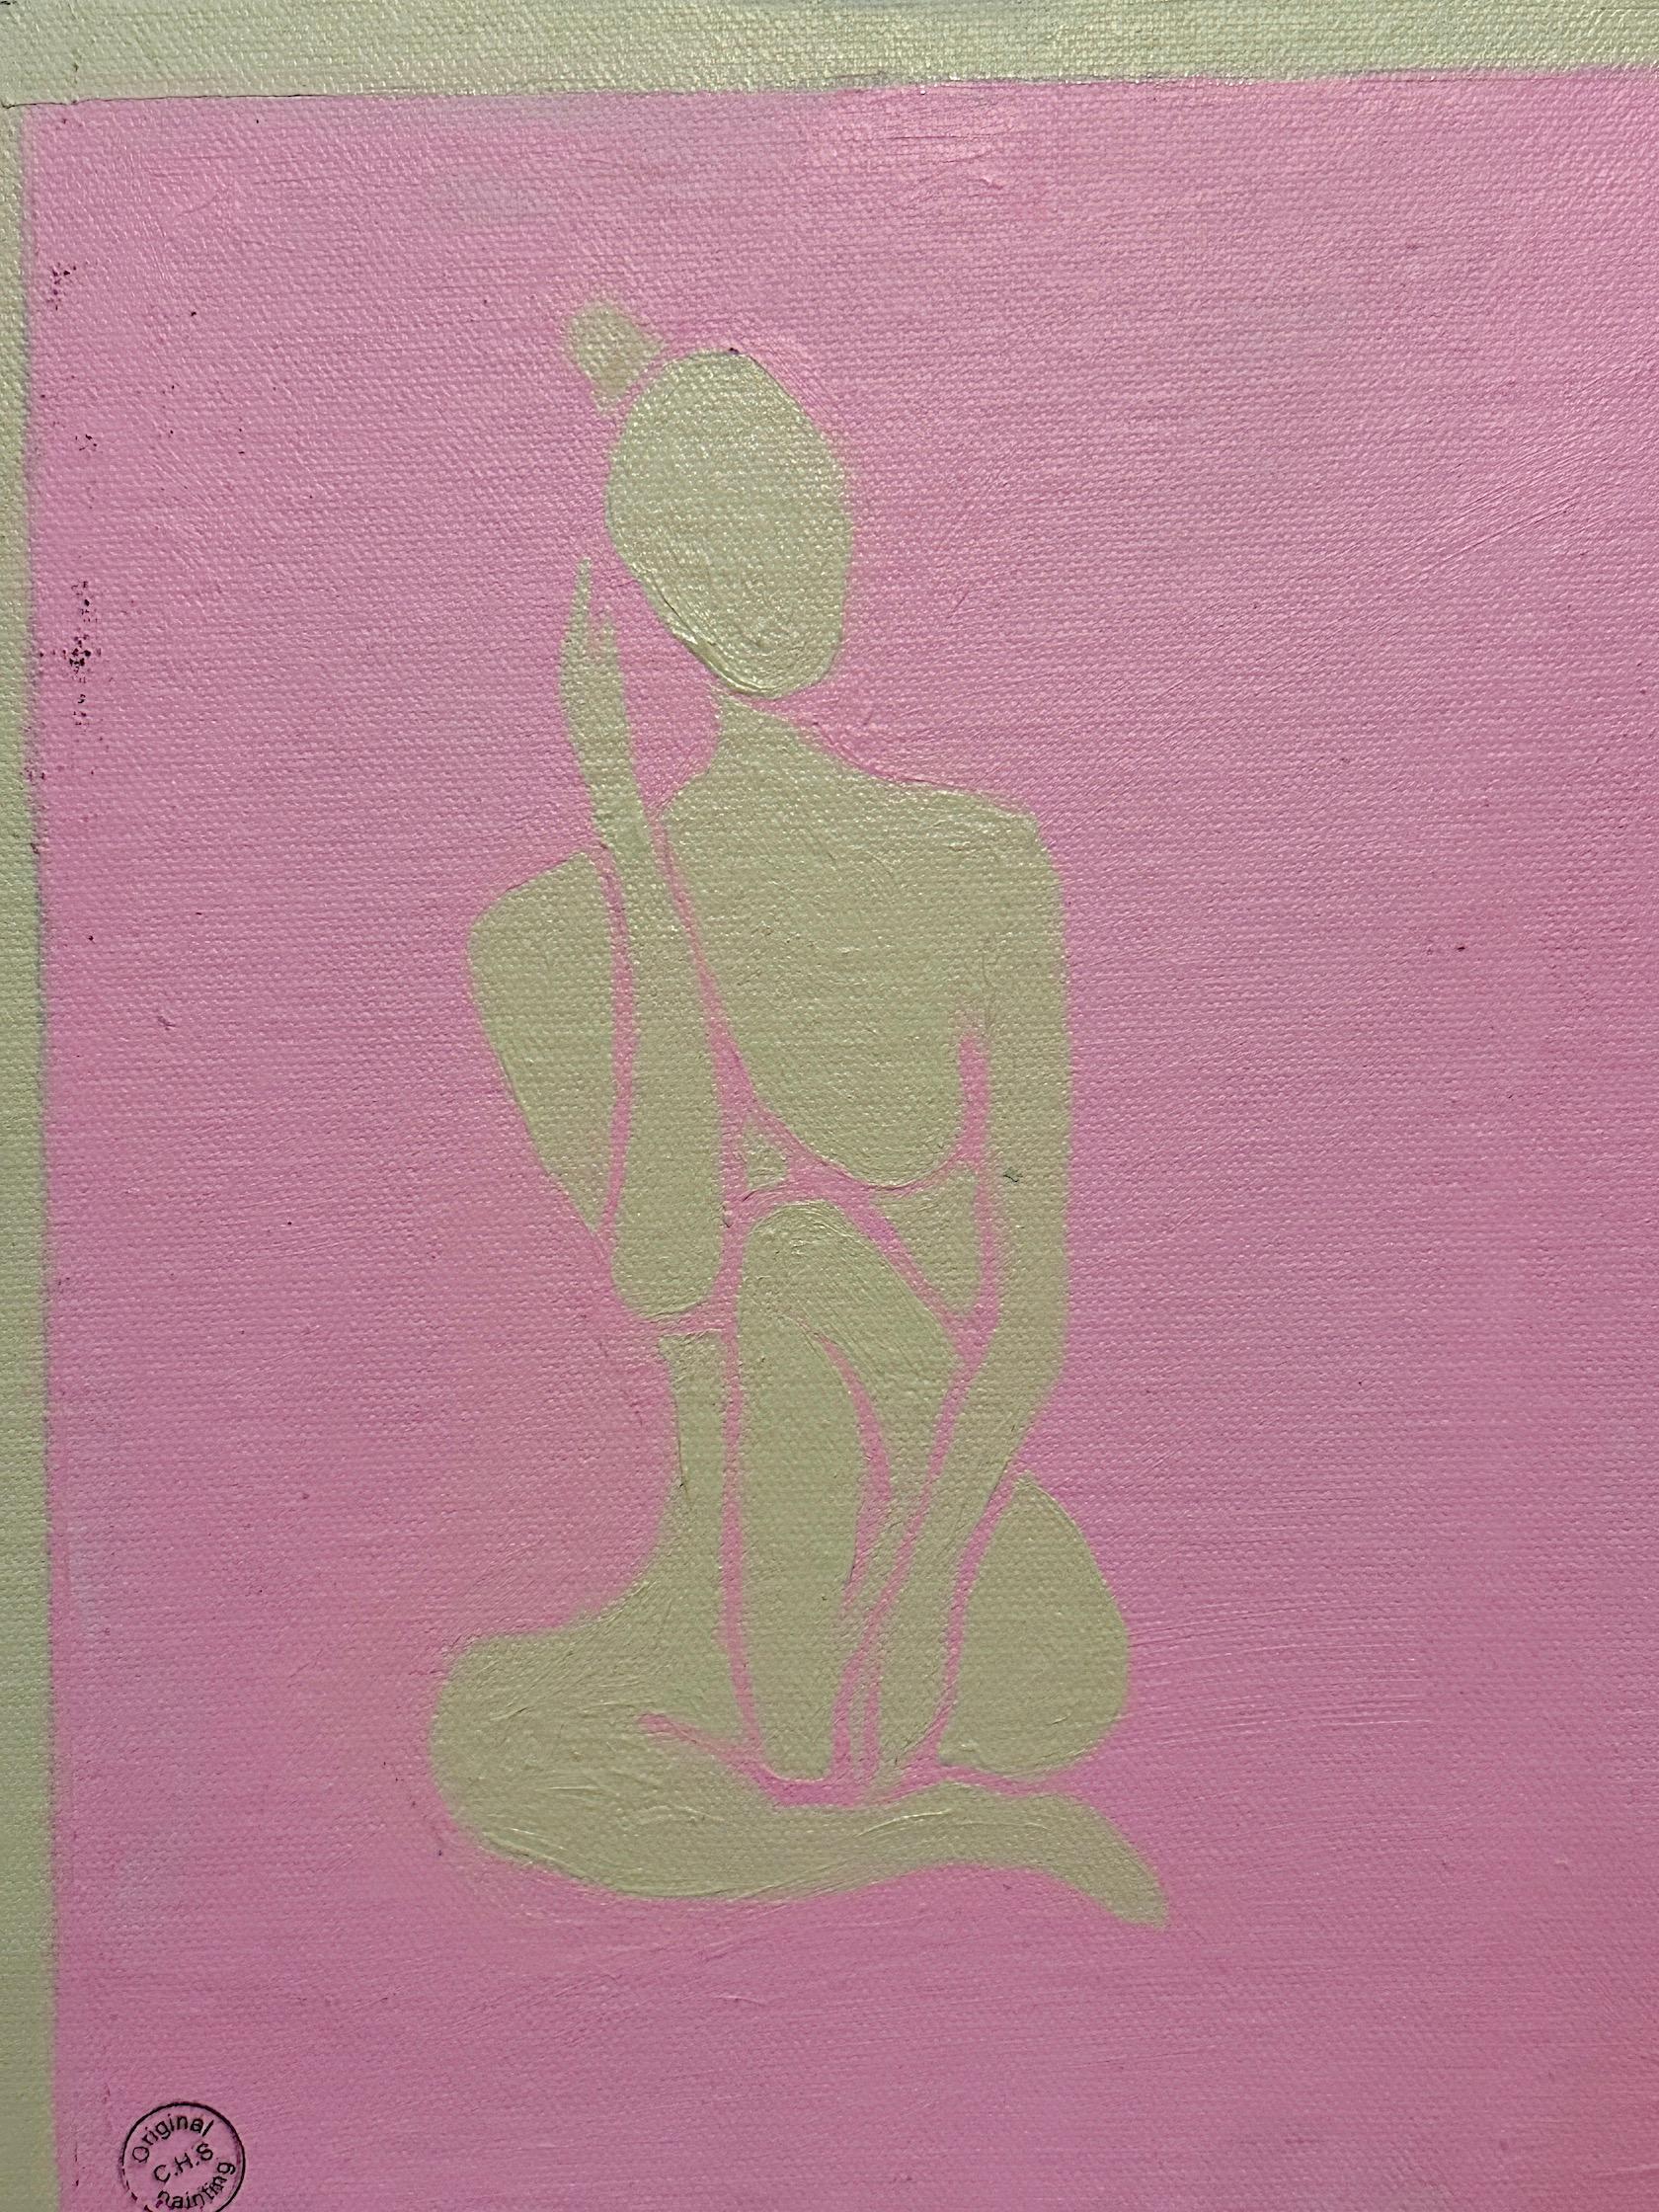 
Acquiring a contemporary English abstract figure painting inspired by Henri Matisse in Pink and White from me is an invitation to bring a vibrant and modern expression of artistic evolution into your space. This unique piece bridges the timeless